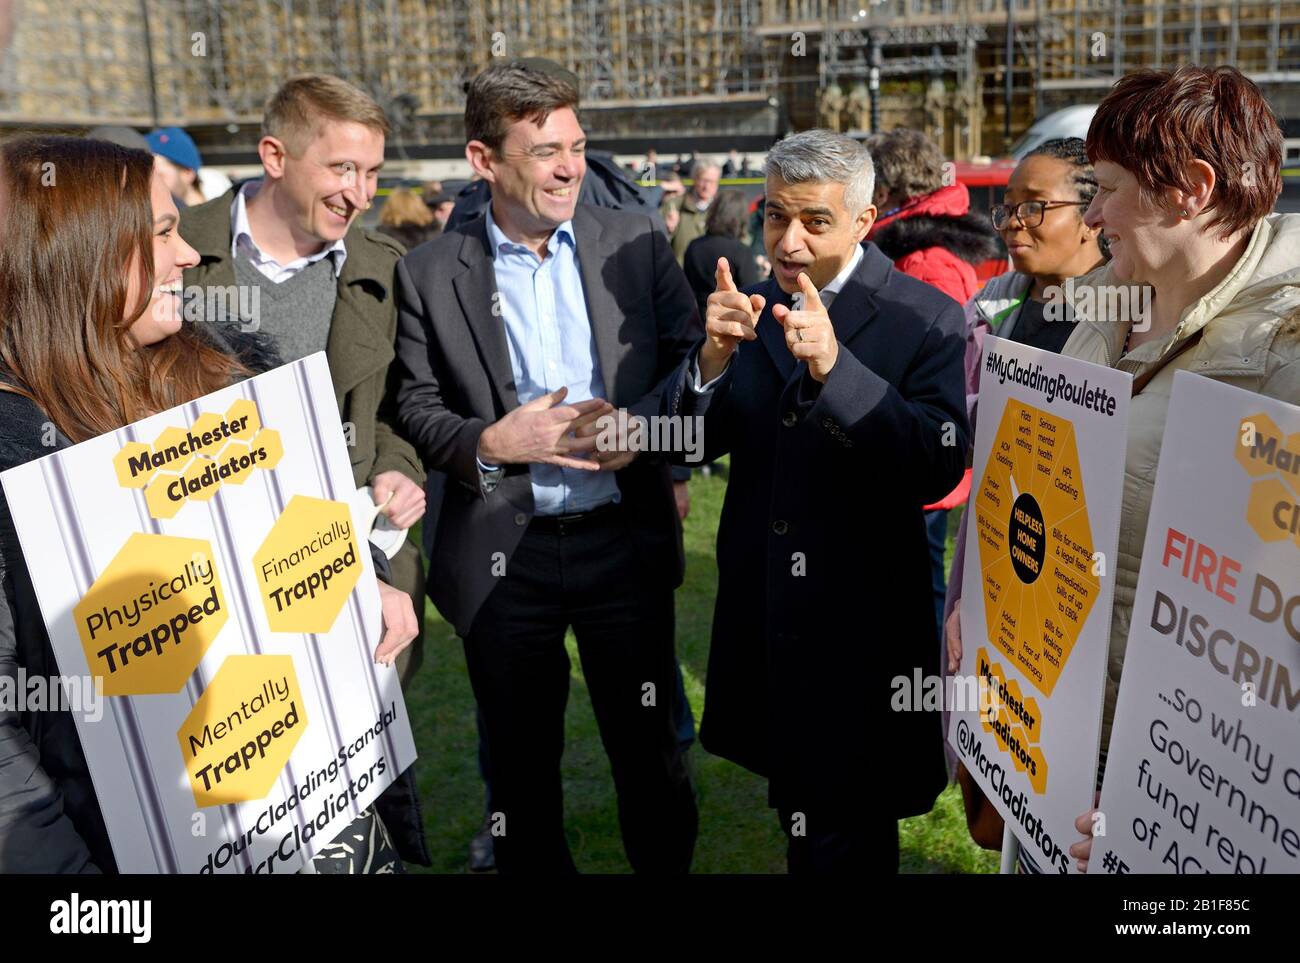 London, UK. 25th Feb, 2020. Mayor of Manchester Andy Burnham and Mayor of Salford Paul Dennett are joined by Sadiq Khan (Mayor of London) and Hilary Benn MP to lobby Government to take immediate action to support high rise residents living in unsafe buildings after the Grenfell Tower tragedy Credit: PjrFoto/Alamy Live News Stock Photo